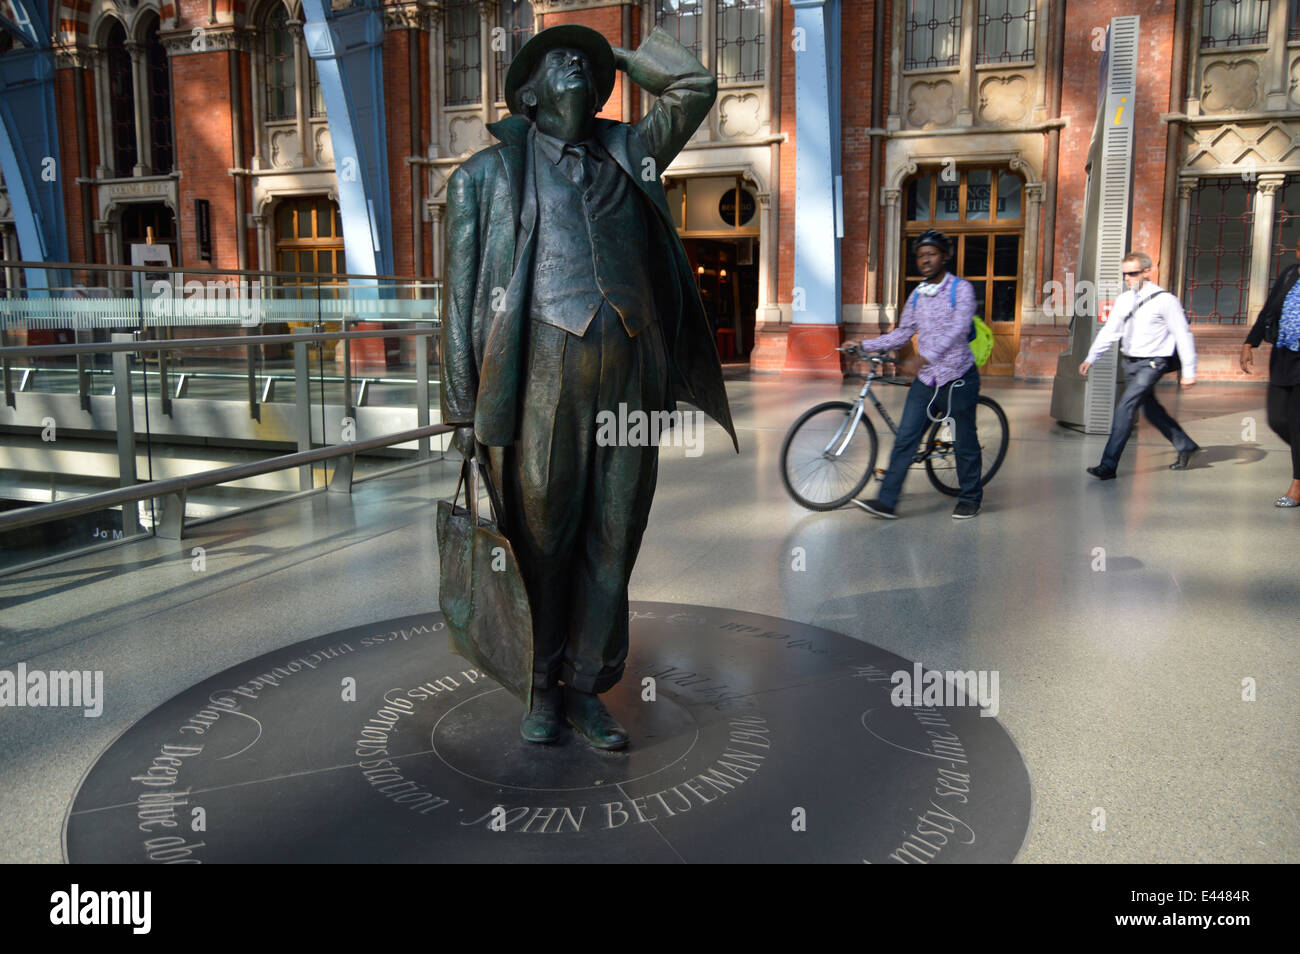 A statue of the writer and saver of St. Pancras Station, Sir John Betjeman, in newly renovated station, London, England, UK Stock Photo